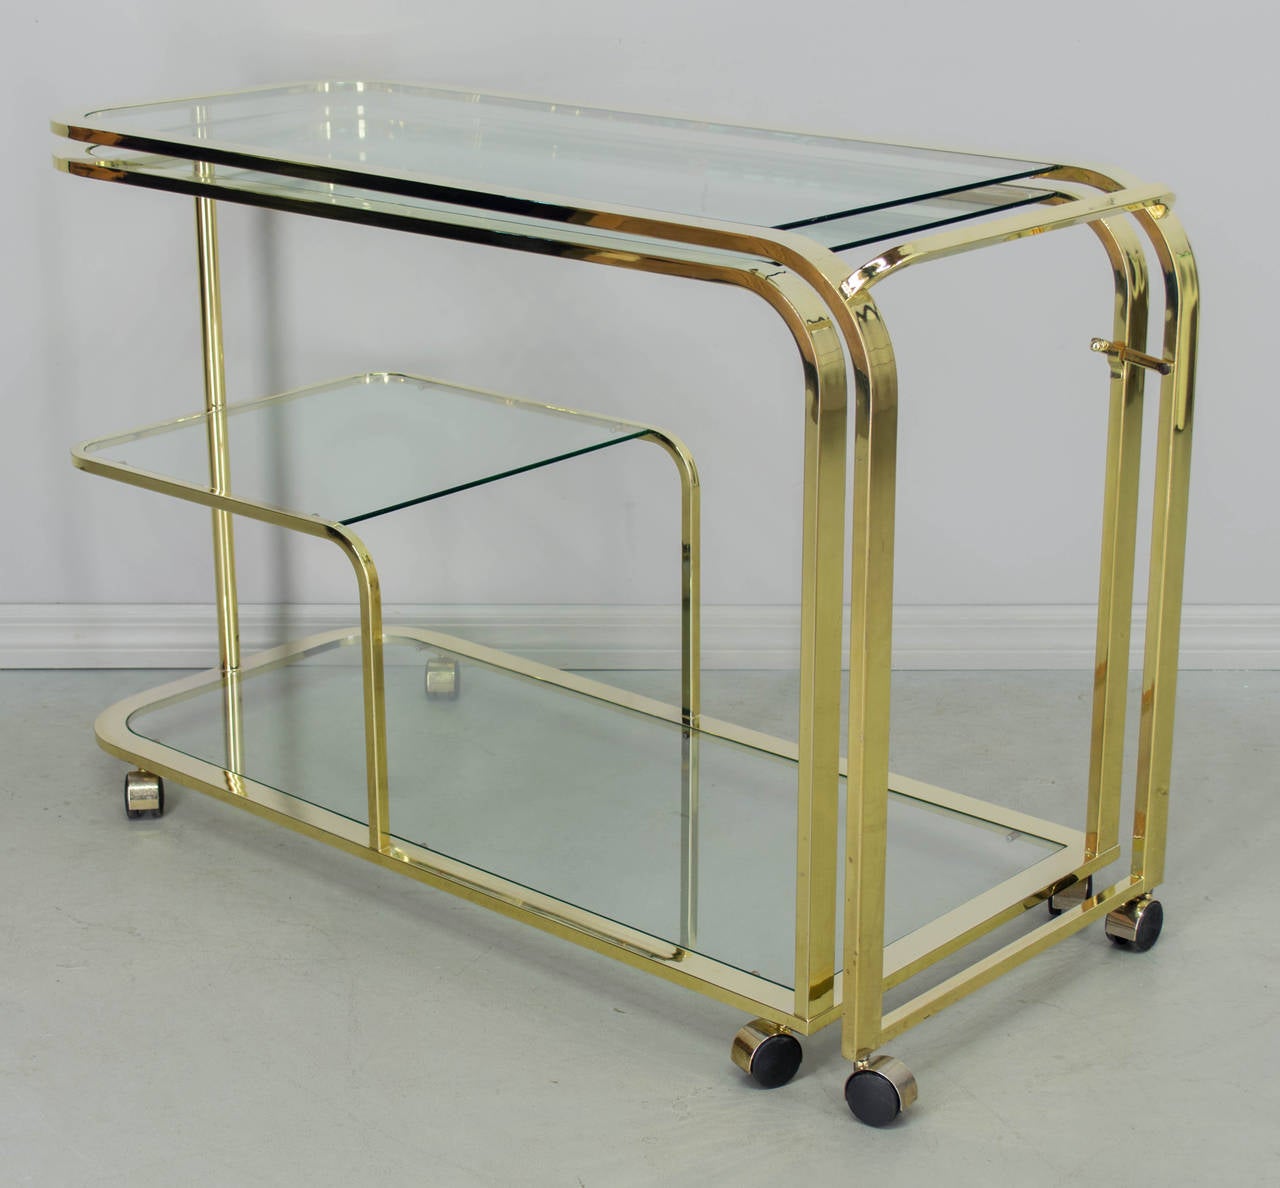 An exceptional design, this rolling bar cart swivels open into a sideboard for extra serving space or can be positioned at a right angle and used as a desk. A versatile piece, this easily converts the home office of a studio apartment into a place